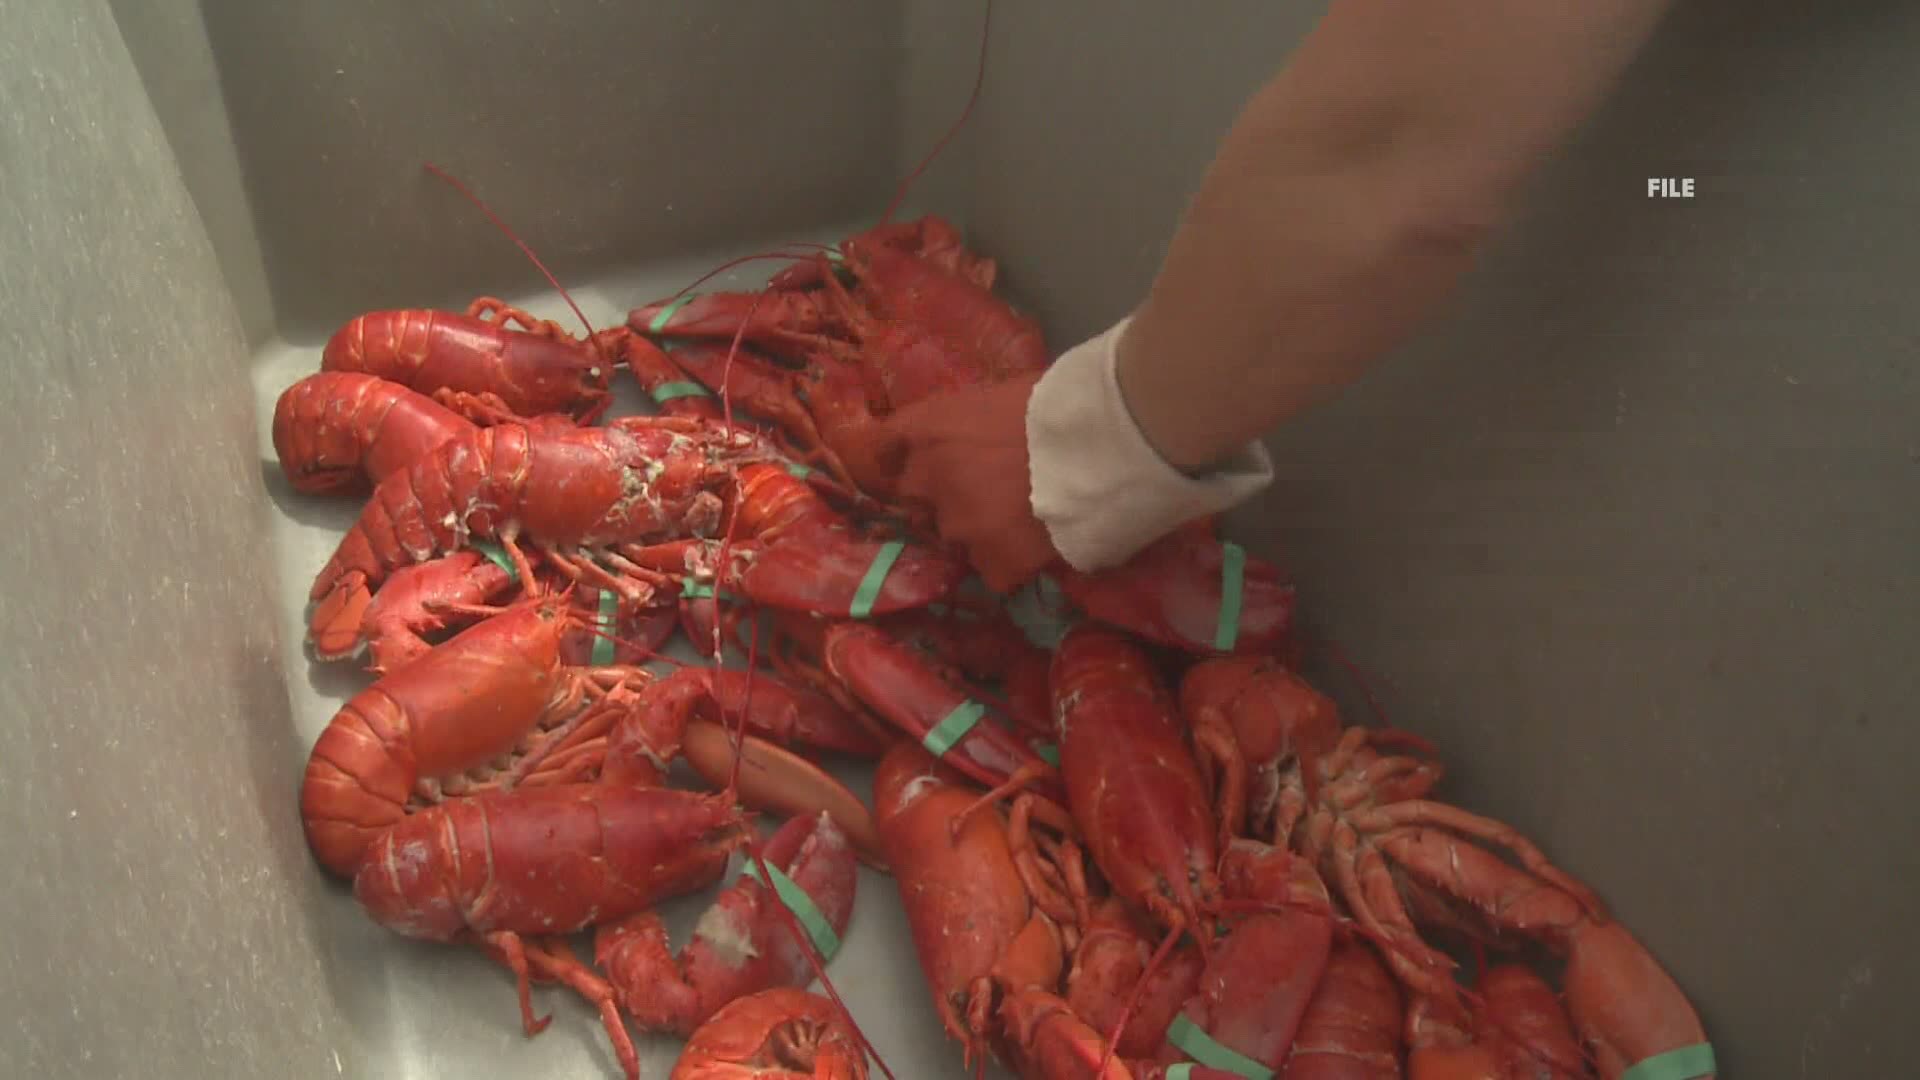 For the second summer in a row, There won't be a lobster festival in Rockland.